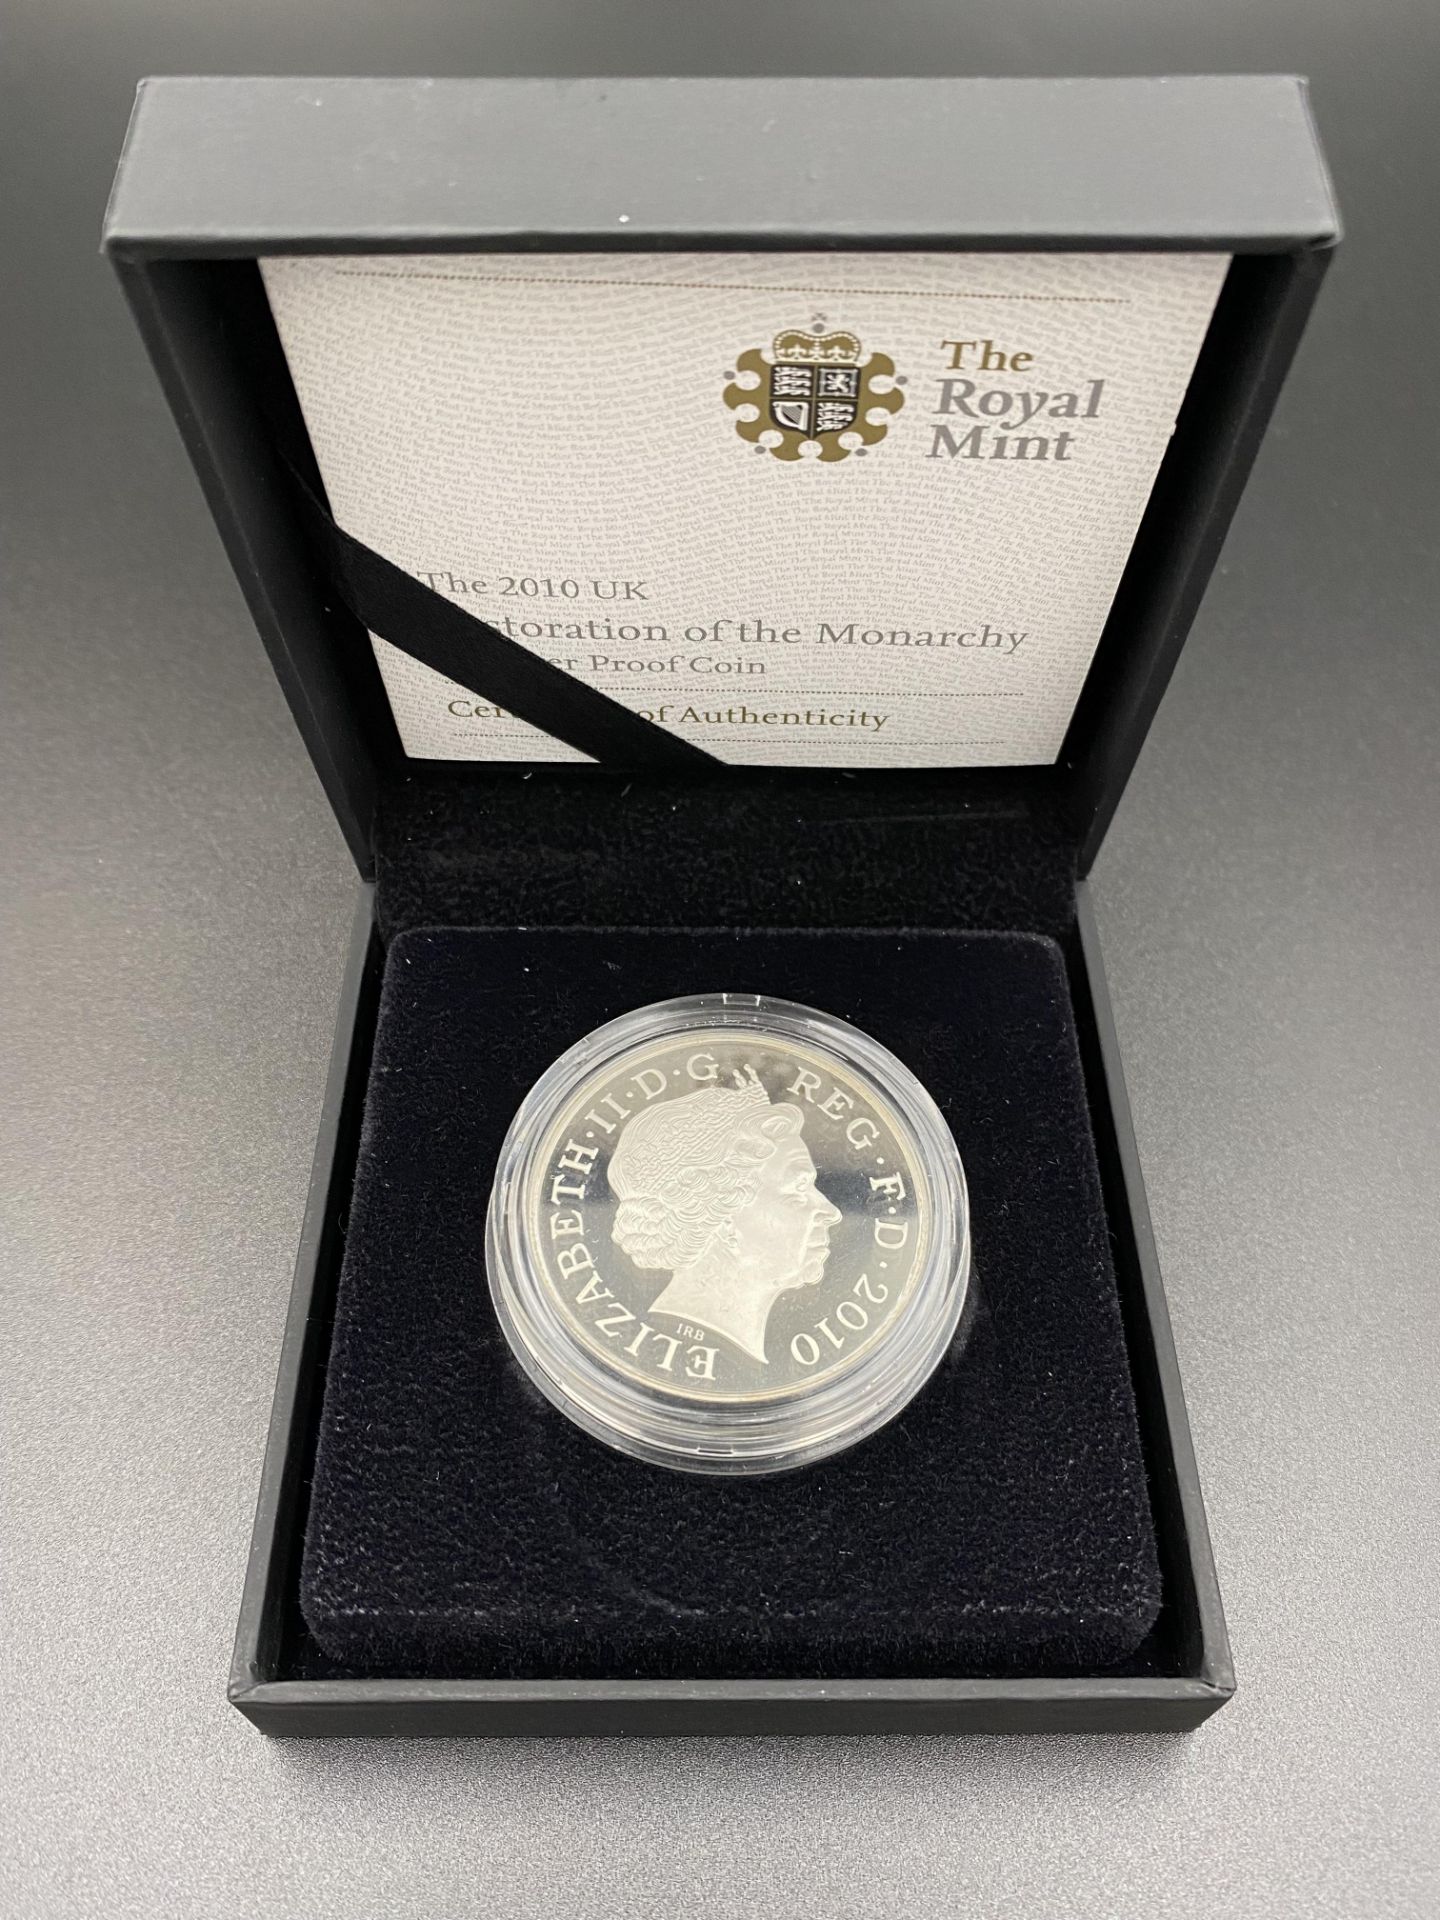 Royal Mint 2010 Restoration of the Monarchy £5 silver proof coin - Image 4 of 4